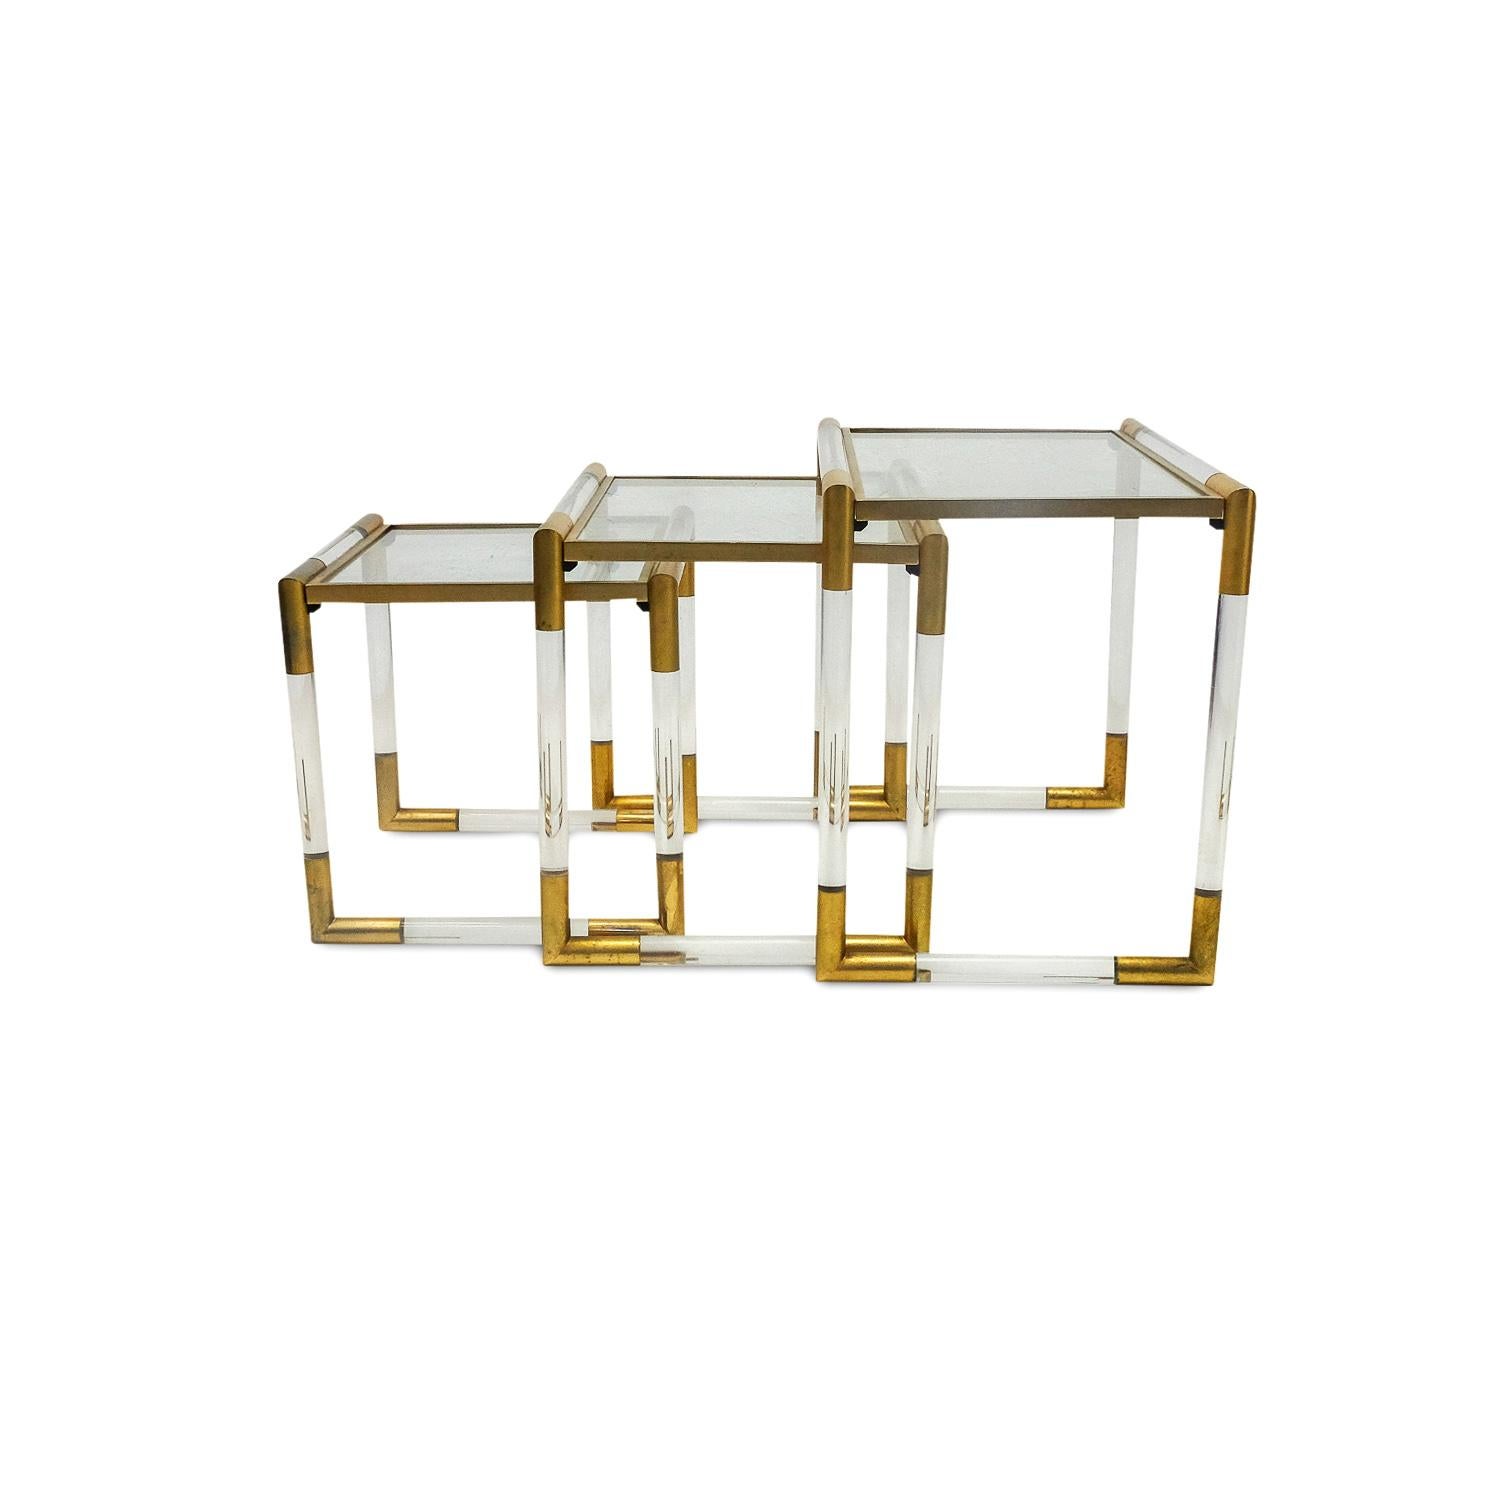 American Lucite Nesting Tables by Charles Hollis Jones, 1970s For Sale